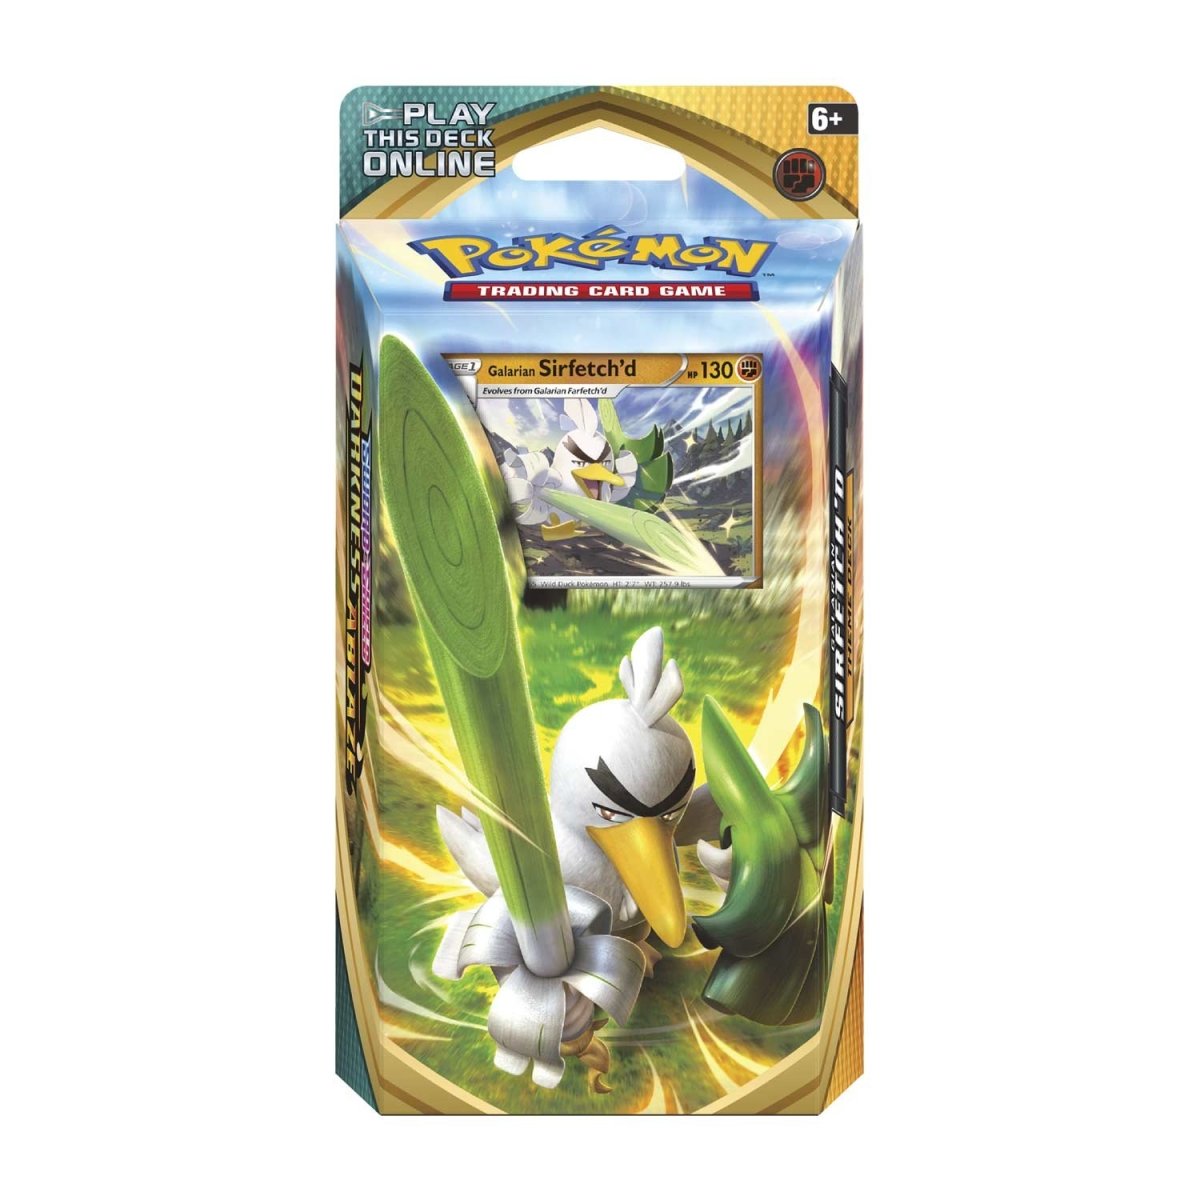 Check the actual price of your Farfetch'd Pokemon card on